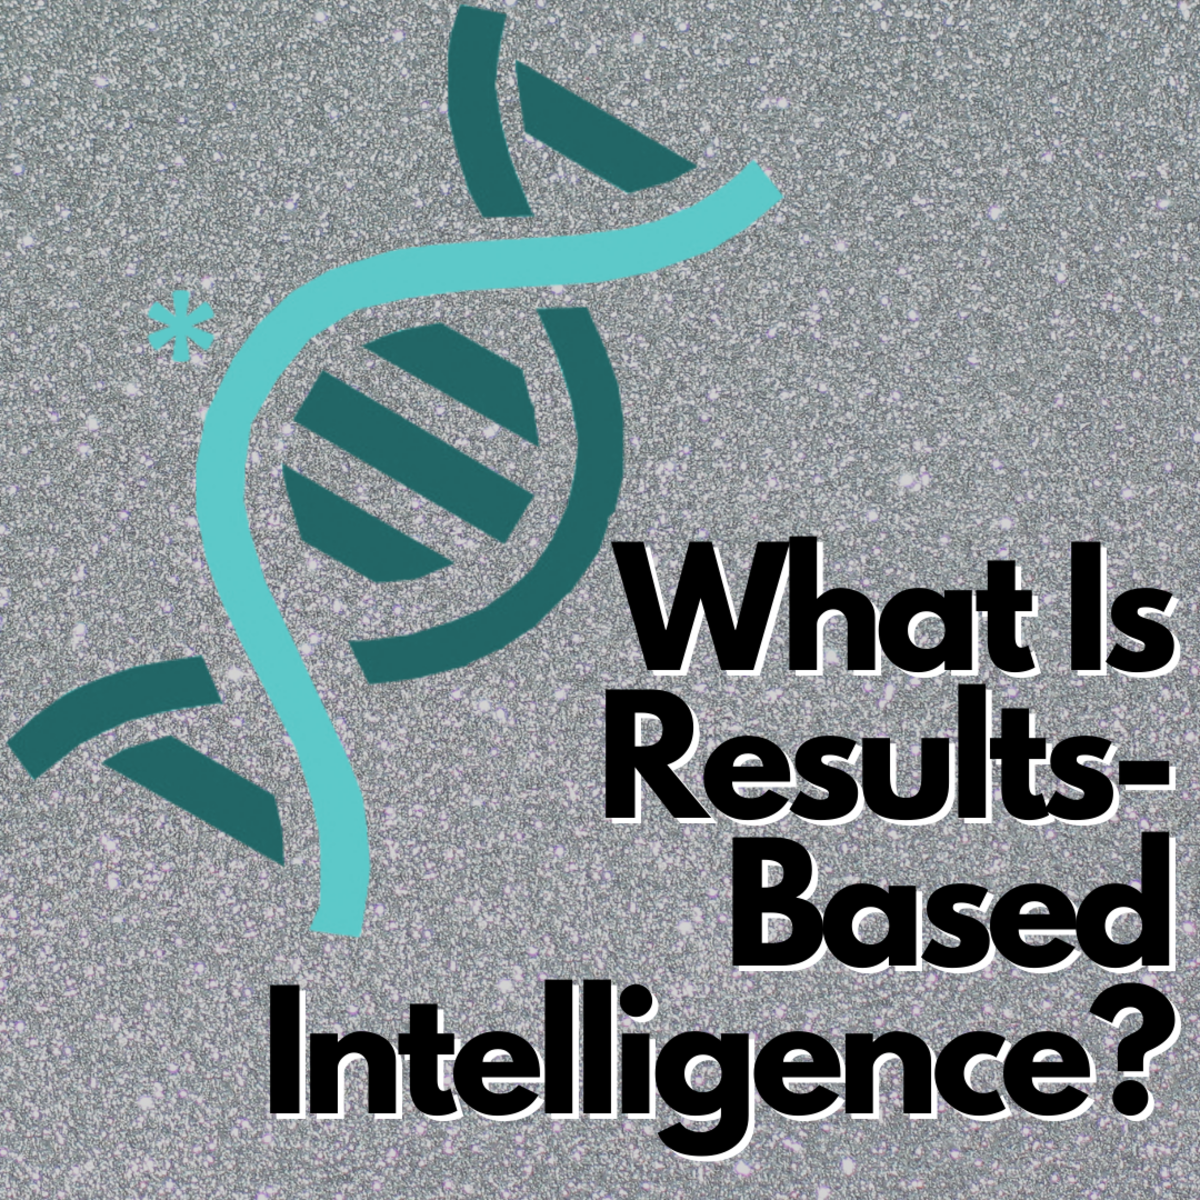 This article gives an overview of three perspectives on the origins of human life and the universe. You'll learn about evolutionary biology, creationism, and results-based intelligence. What is results-based intelligence? Read on to find out.